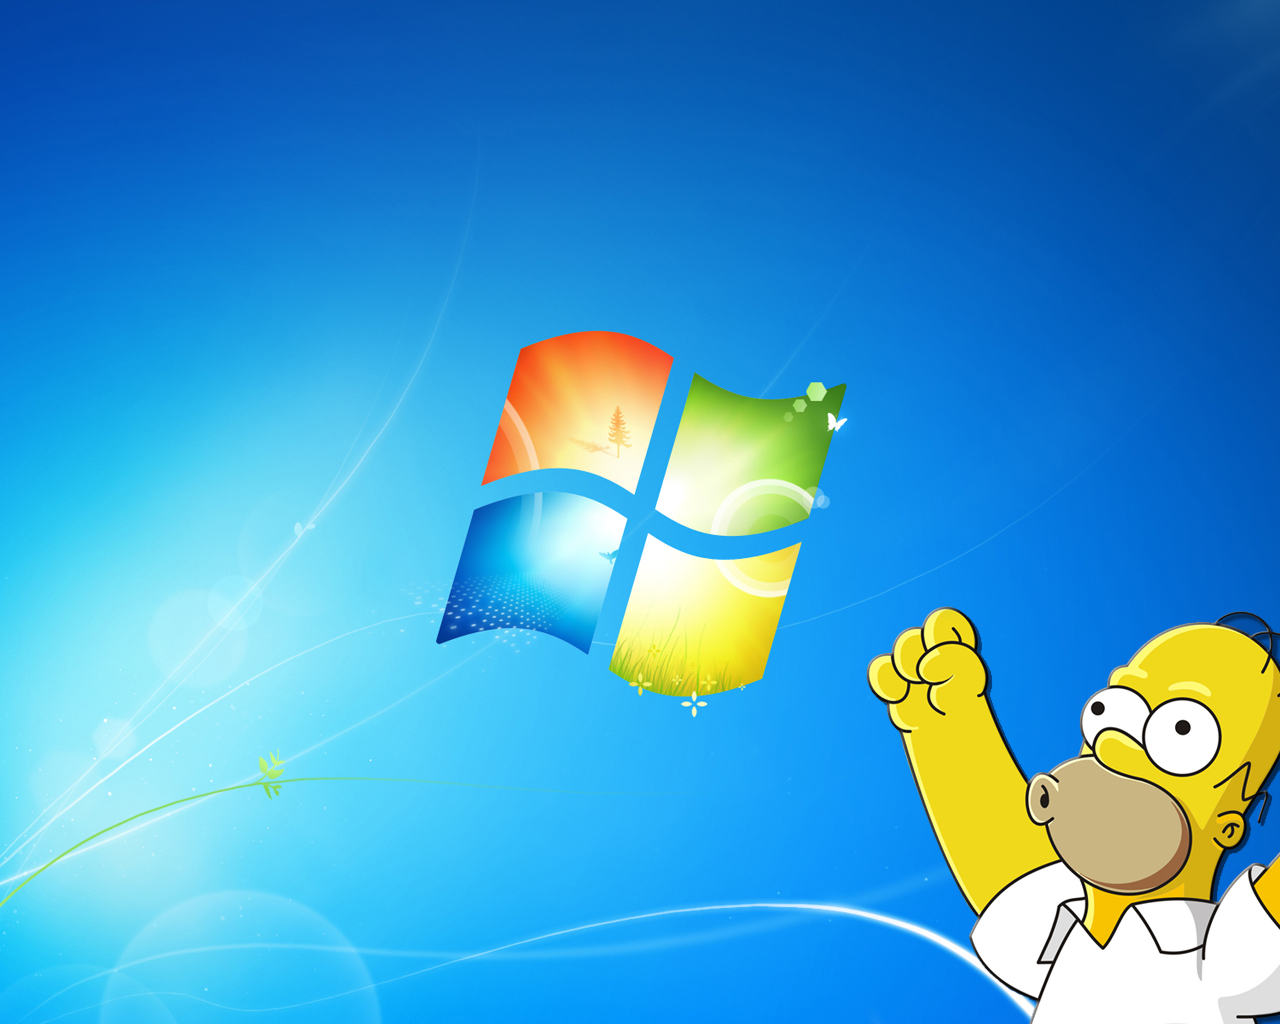 Windows Wallpaper With Homer Simpson Apps Directories